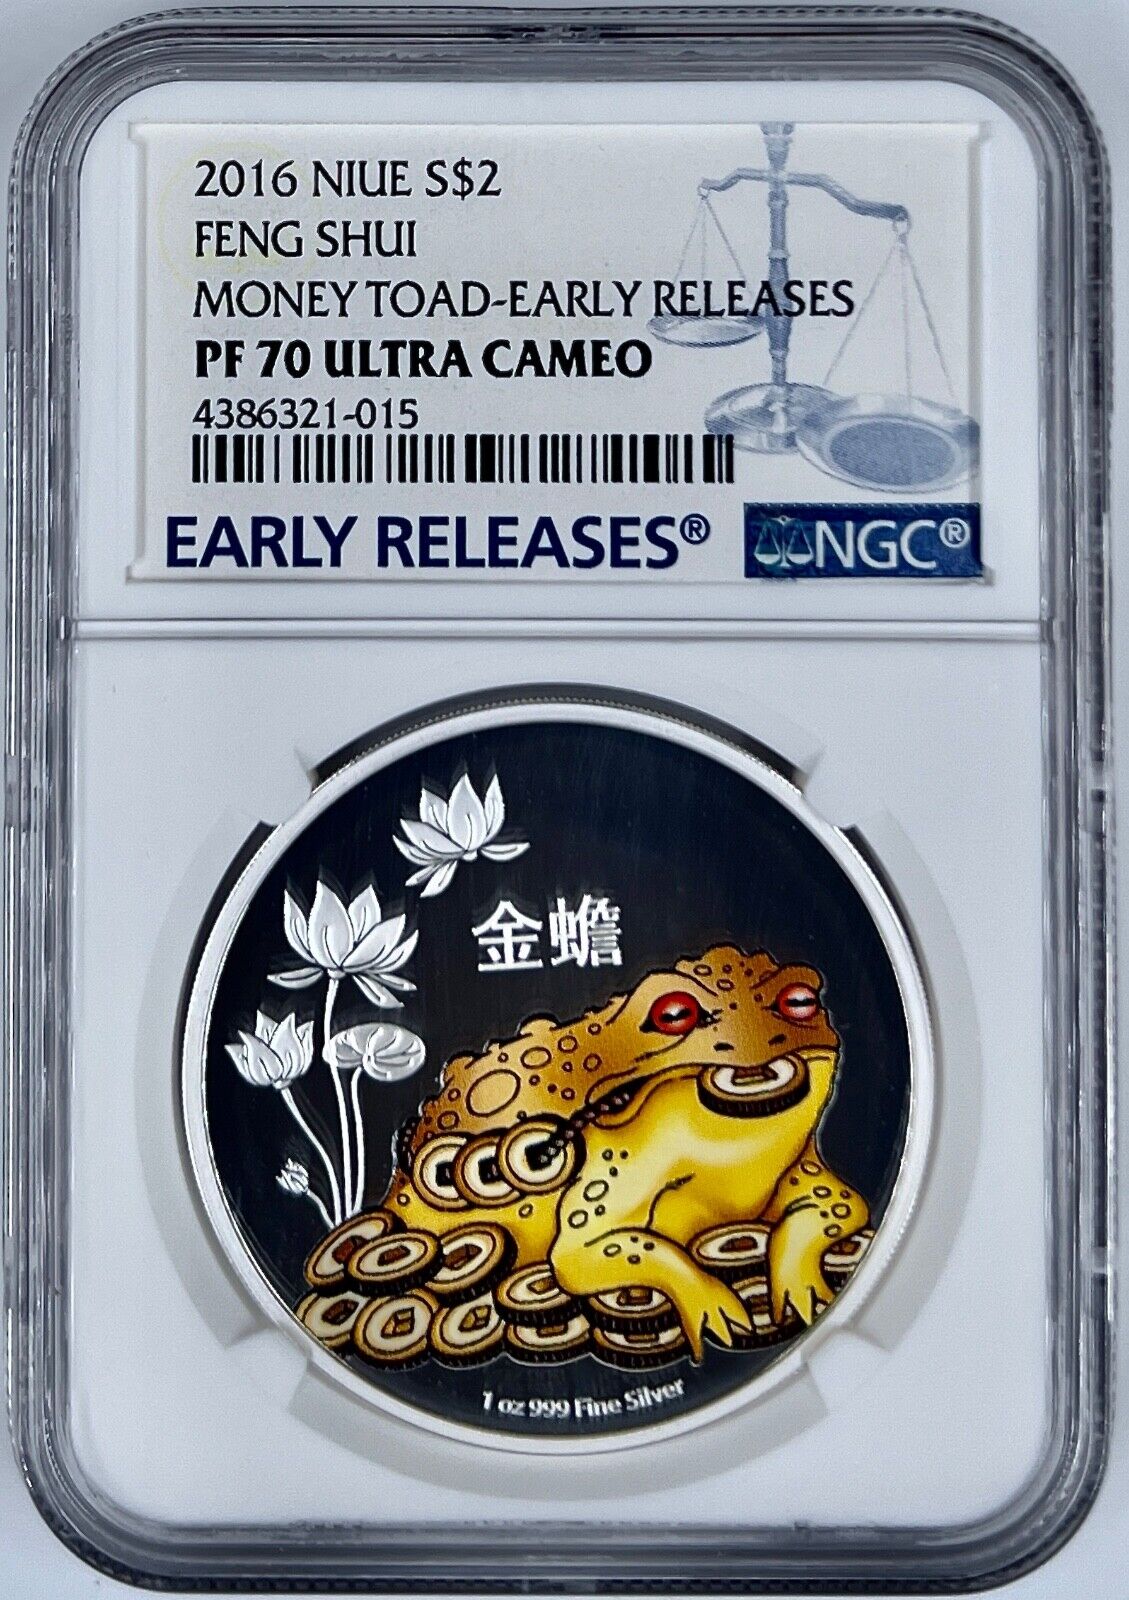 2016 Niue $2 Feng Shui Money Toad Silver Coin NGC PF70UCAM Colorized ER 999